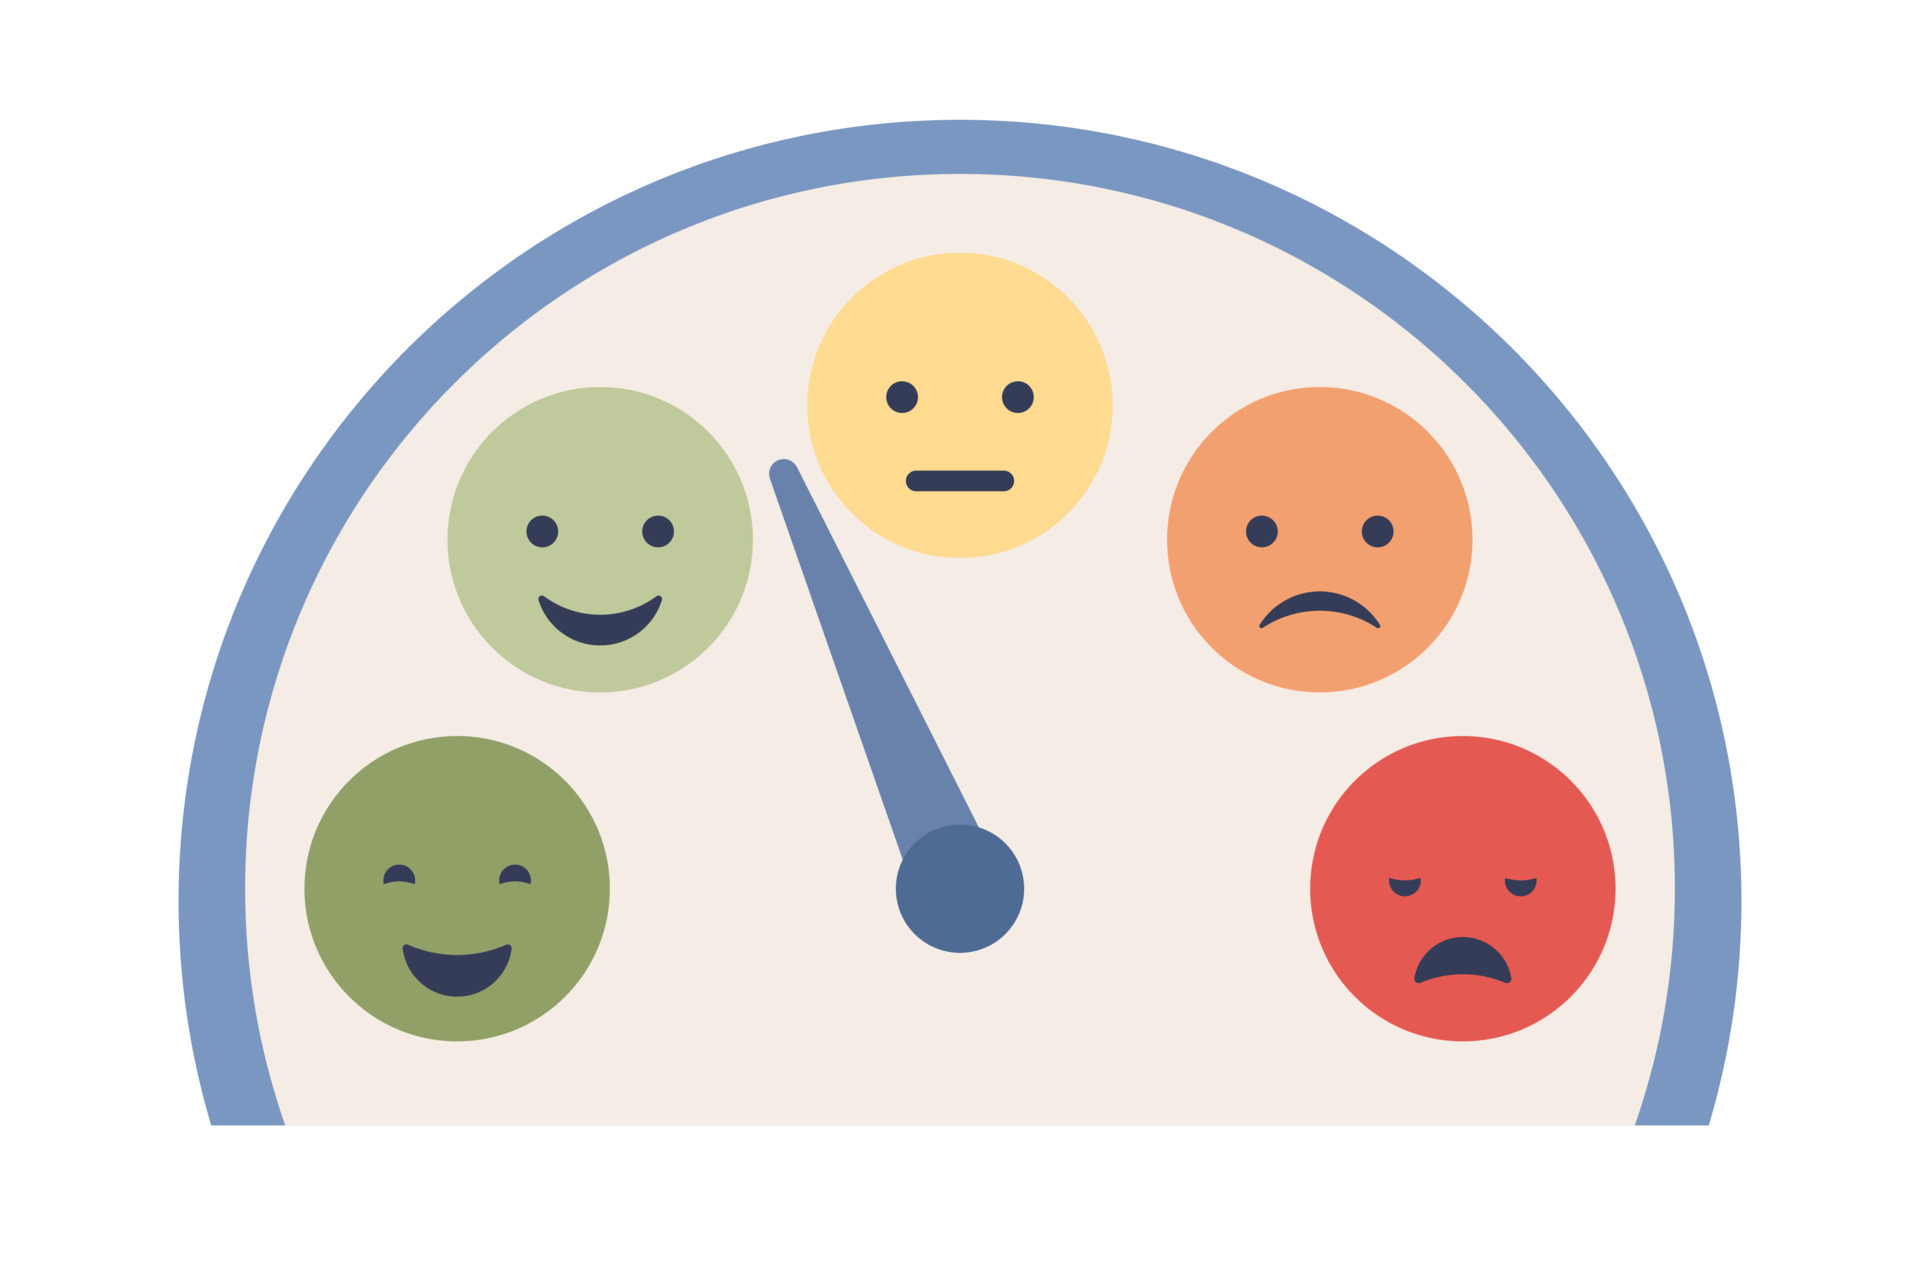 https://static.vecteezy.com/system/resources/previews/021/044/516/original/mood-scale-icon-stress-level-scale-of-emotions-with-smiles-emotional-intelligence-mental-health-concept-flat-illustration-vector.jpg